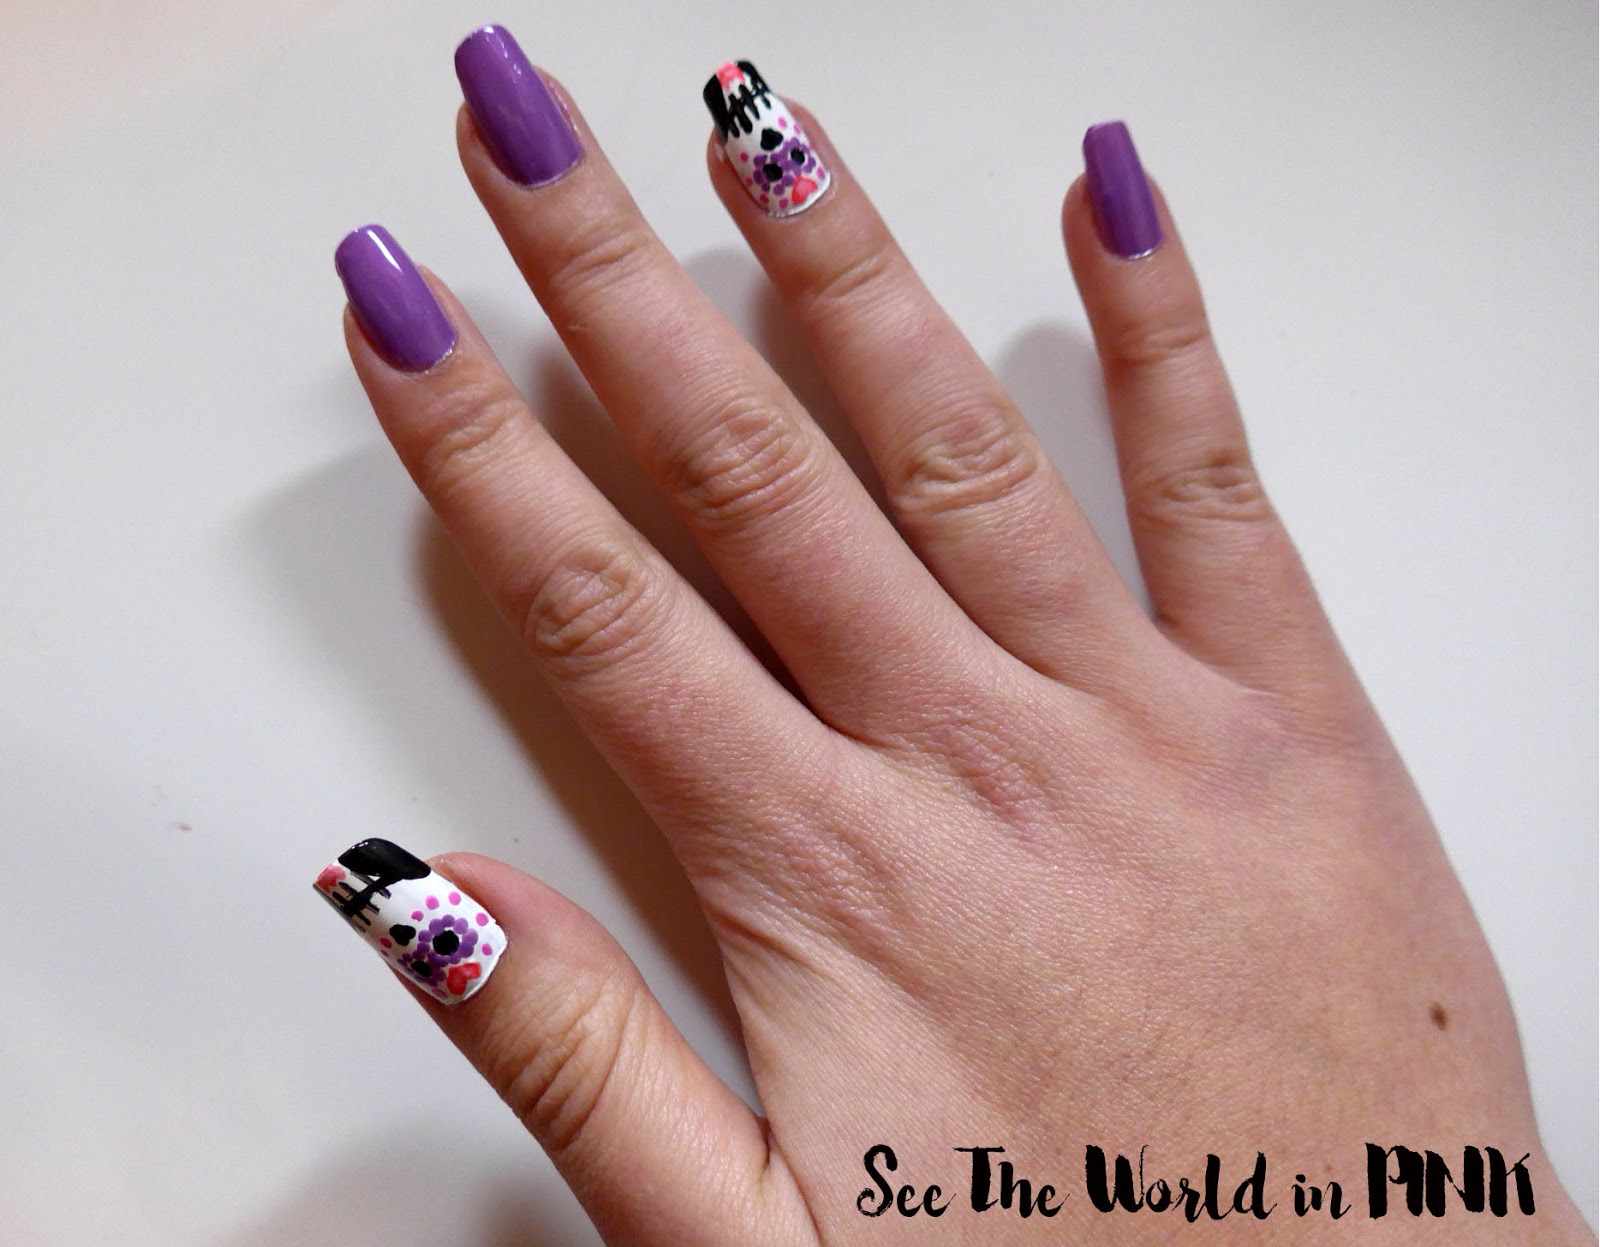 Manicure Tuesday - Dia de Muertos Sugar Skull Nails (Day of the Dead) 